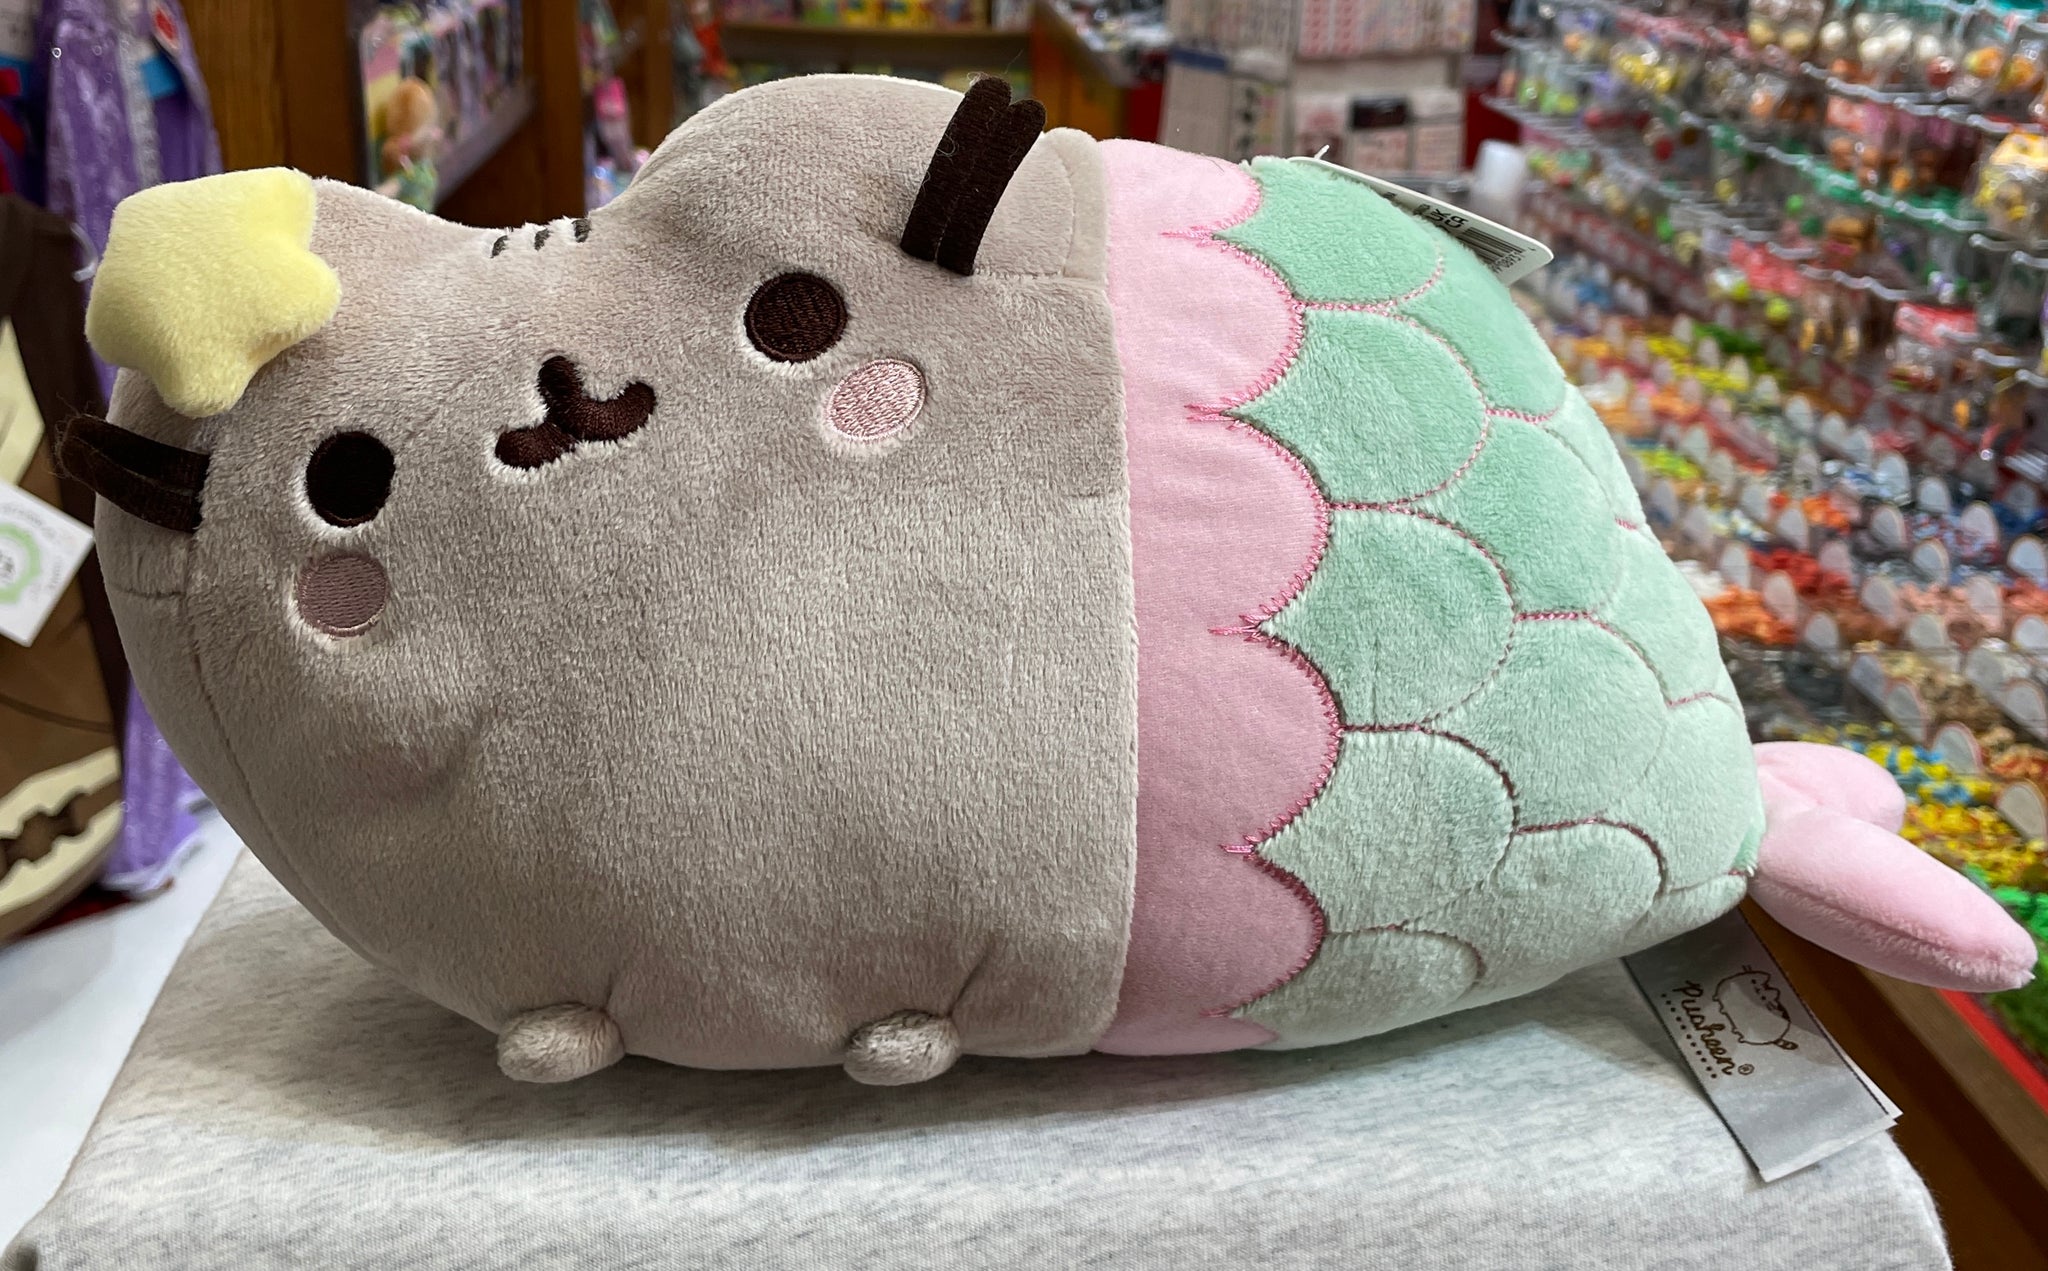  GUND Pusheen Mermaid Plush, Stuffed Animal for Ages 8 and Up,  Green/Pink, 12” : Toys & Games